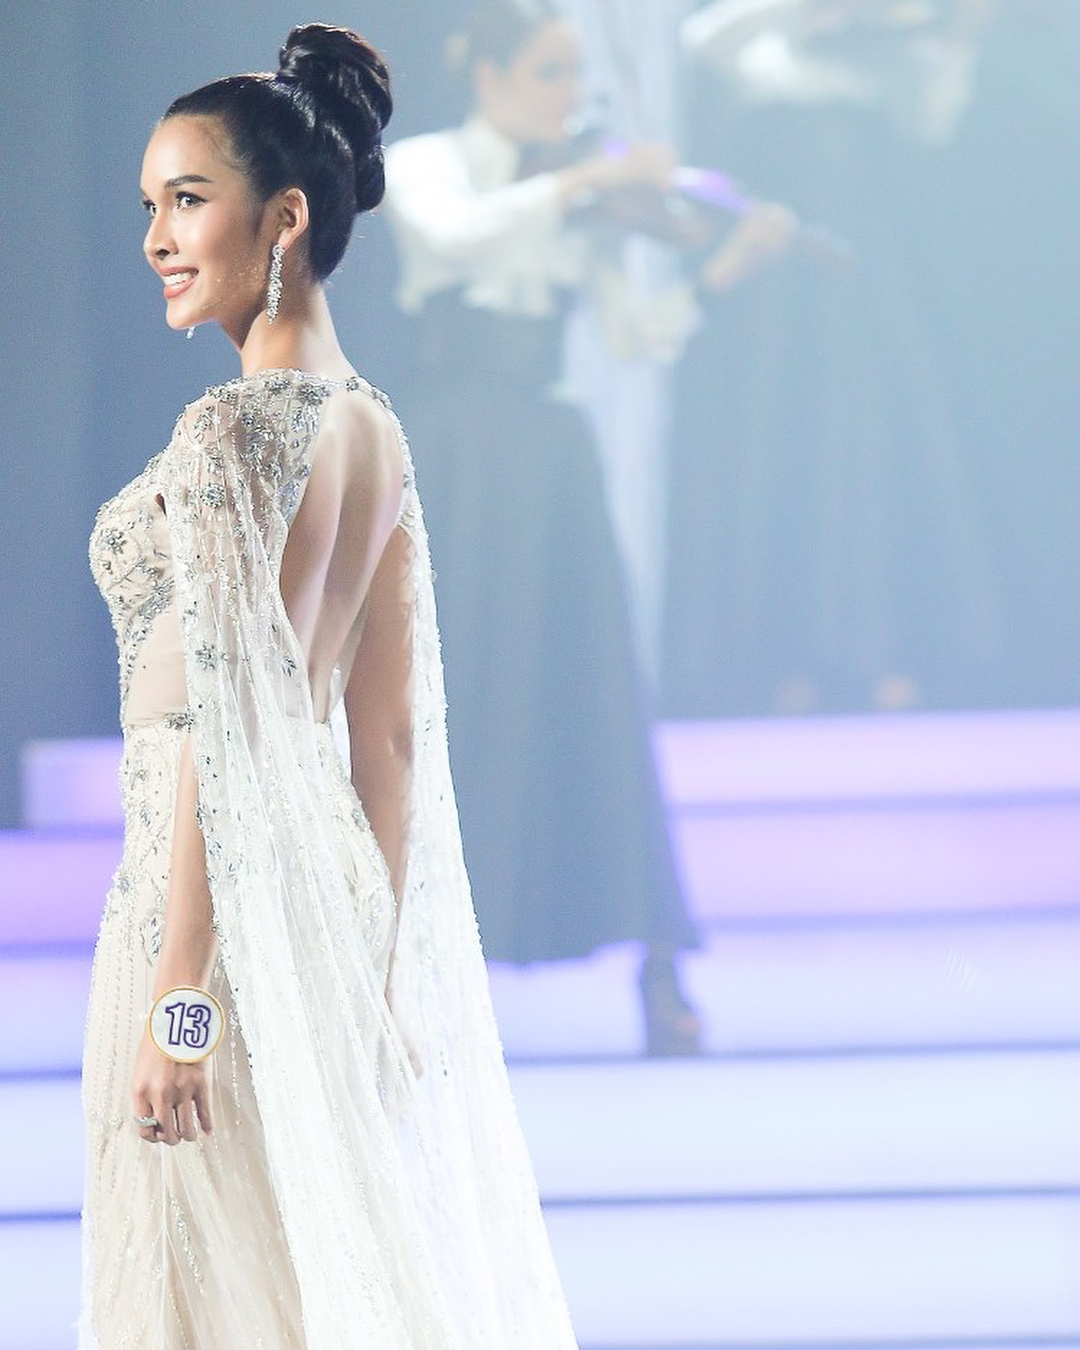 Billy – Most Beautiful Thai Transgender Pageant Contestants